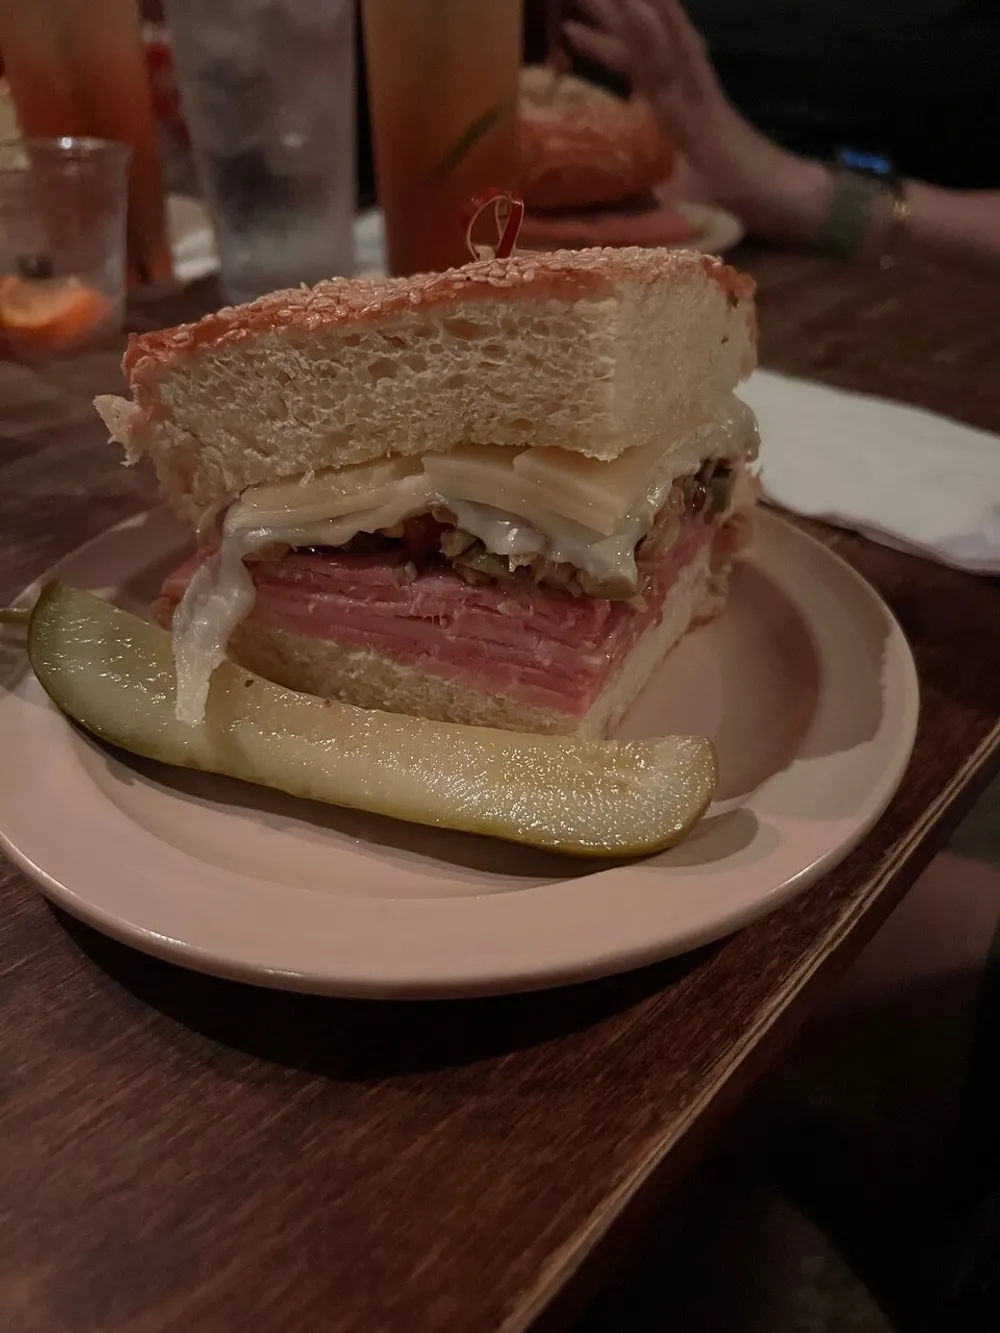 The image showcases a thickly layered sandwich on a plate next to a pickle spear with a blurred background indicating a casual dining setting